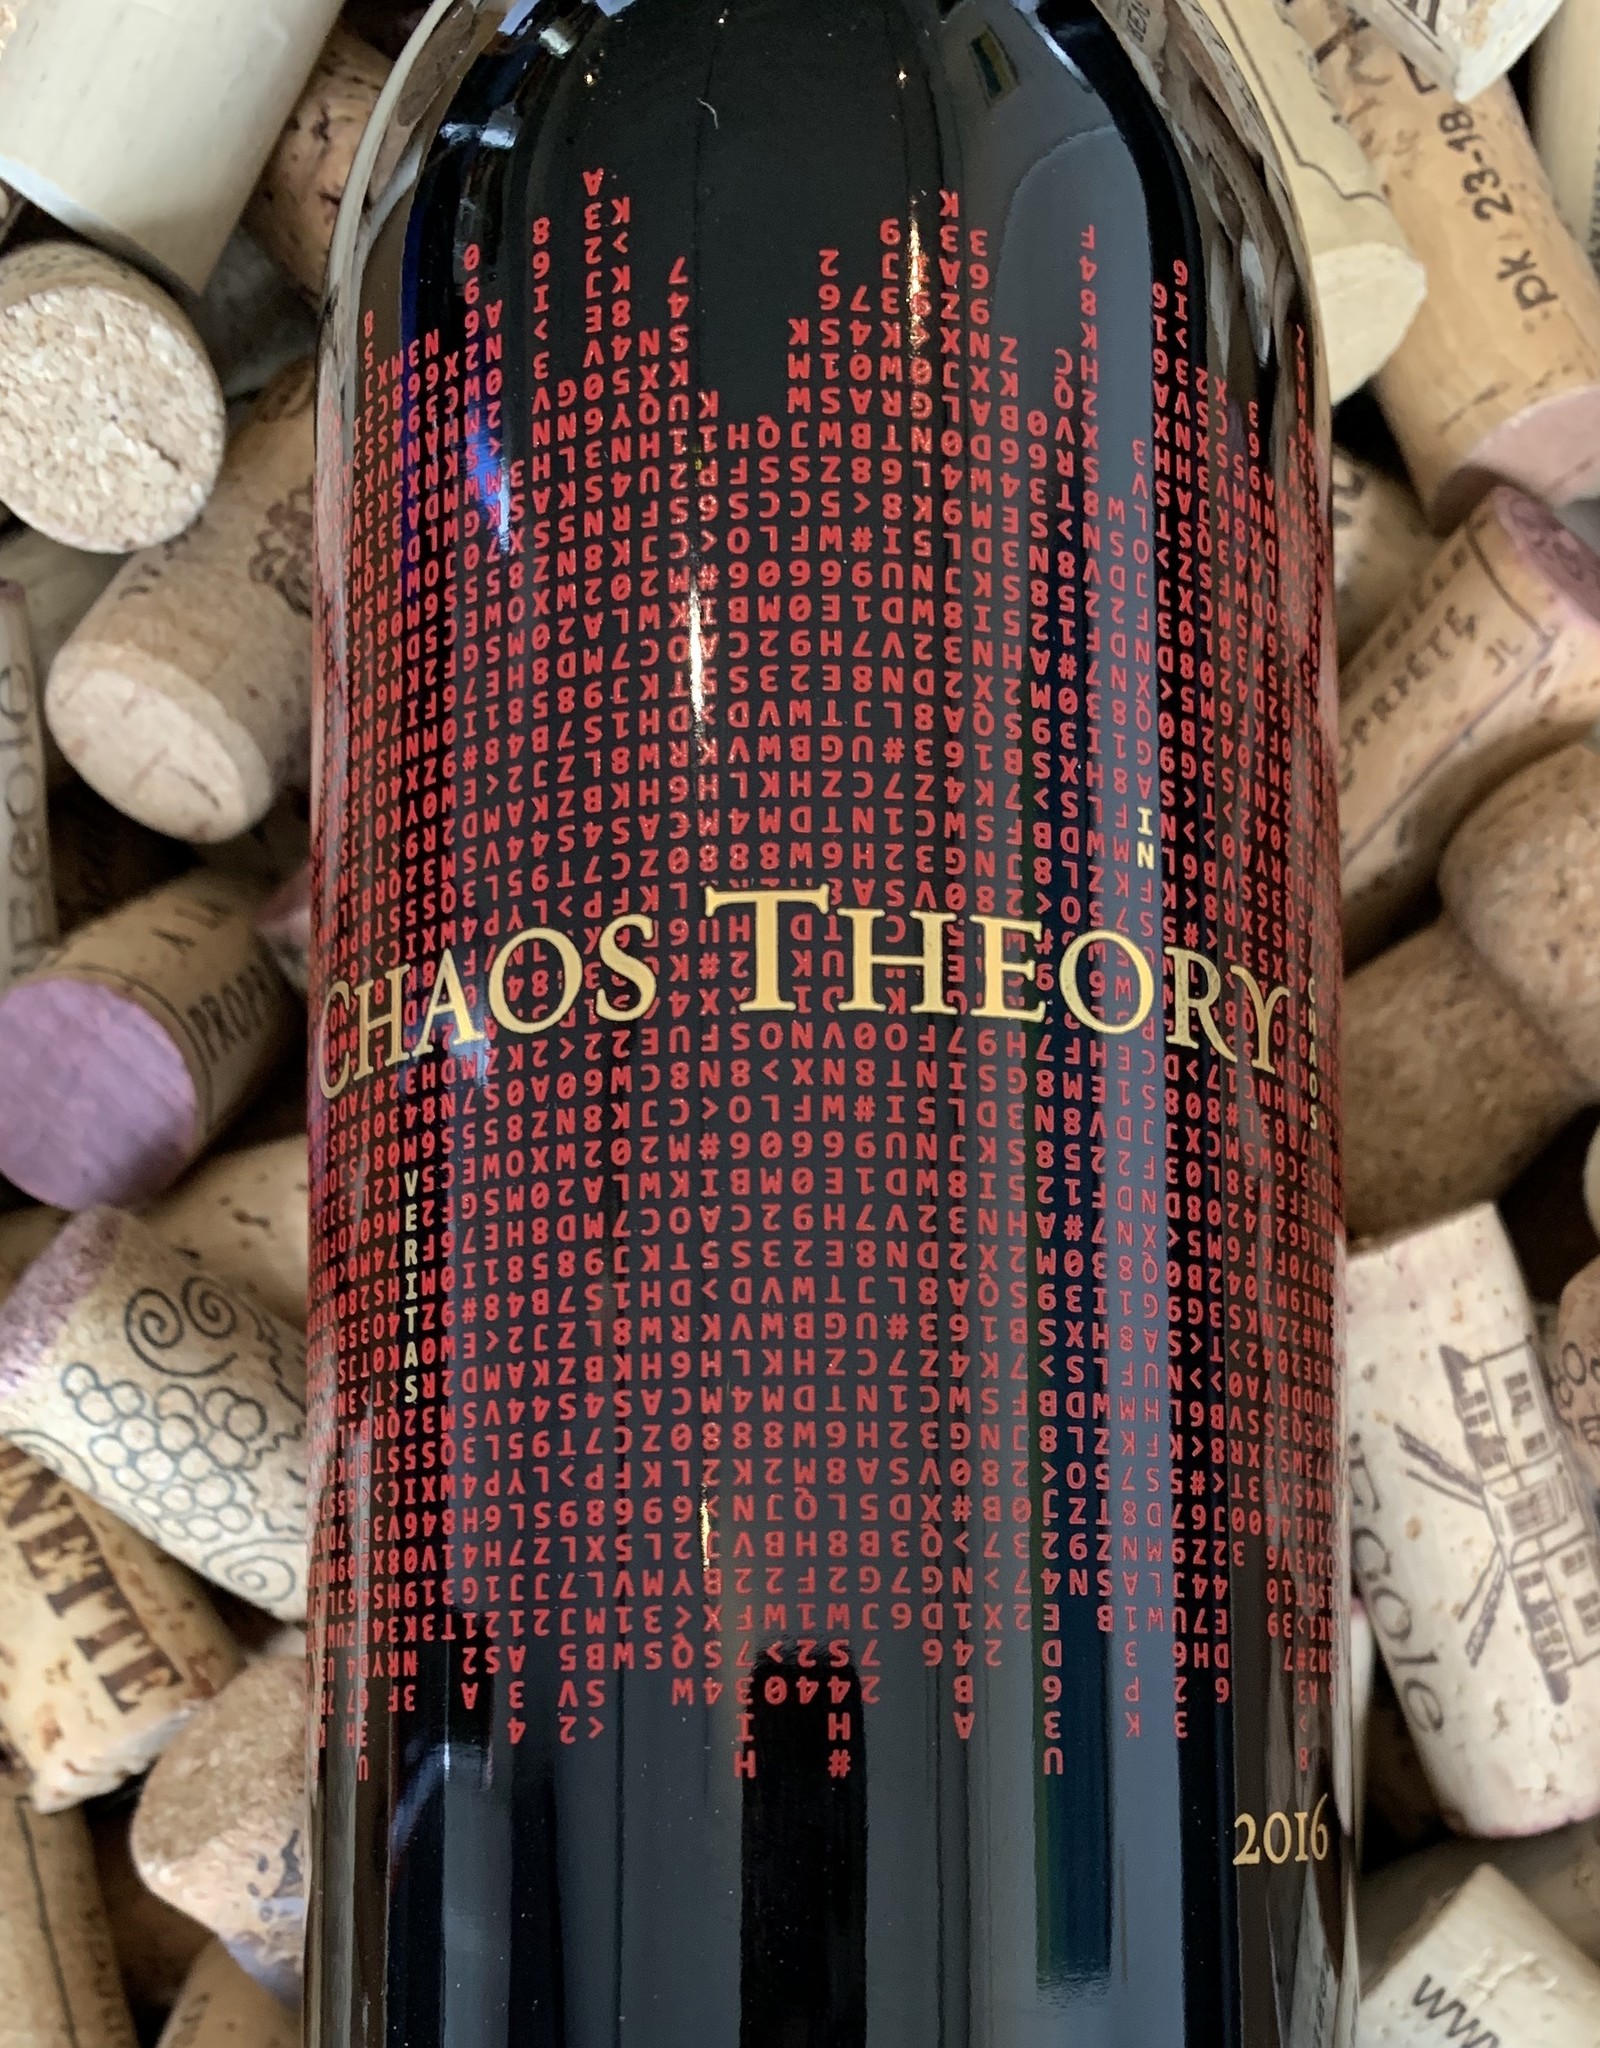 Brown Estate Brown Estate Chaos Theory Brown Estate Chaos Theory California Red Blend